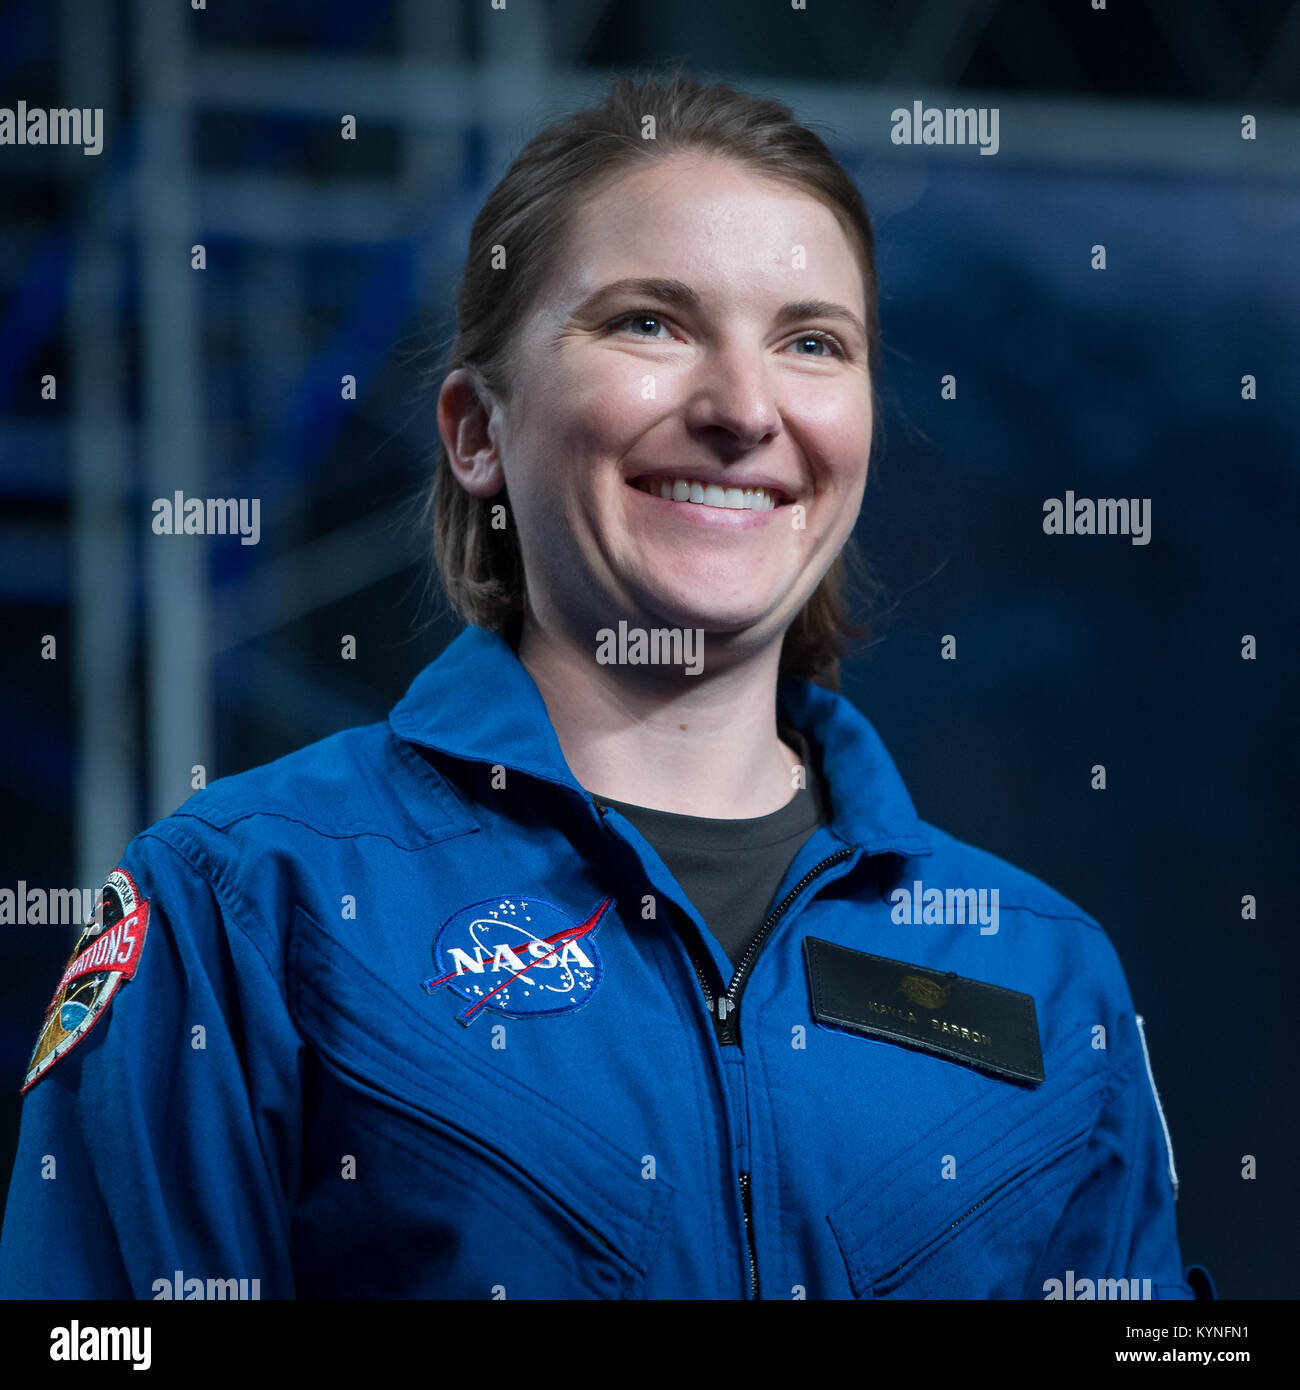 29-year-old NASA astronaut candidate Kayla Barron smiles as she is introduced as one of 12 new candidates, Wednesday, June 7, 2017 during an event at NASA’s Johnson Space Center in Houston, Texas. After completing two years of training, the new astronaut candidates could be assigned to missions performing research on the International Space Station, launching from American soil on spacecraft built by commercial companies, and launching on deep space missions on NASA’s new Orion spacecraft and Space Launch System rocket. Photo Credit: (NASA/Bill Ingalls) Stock Photo